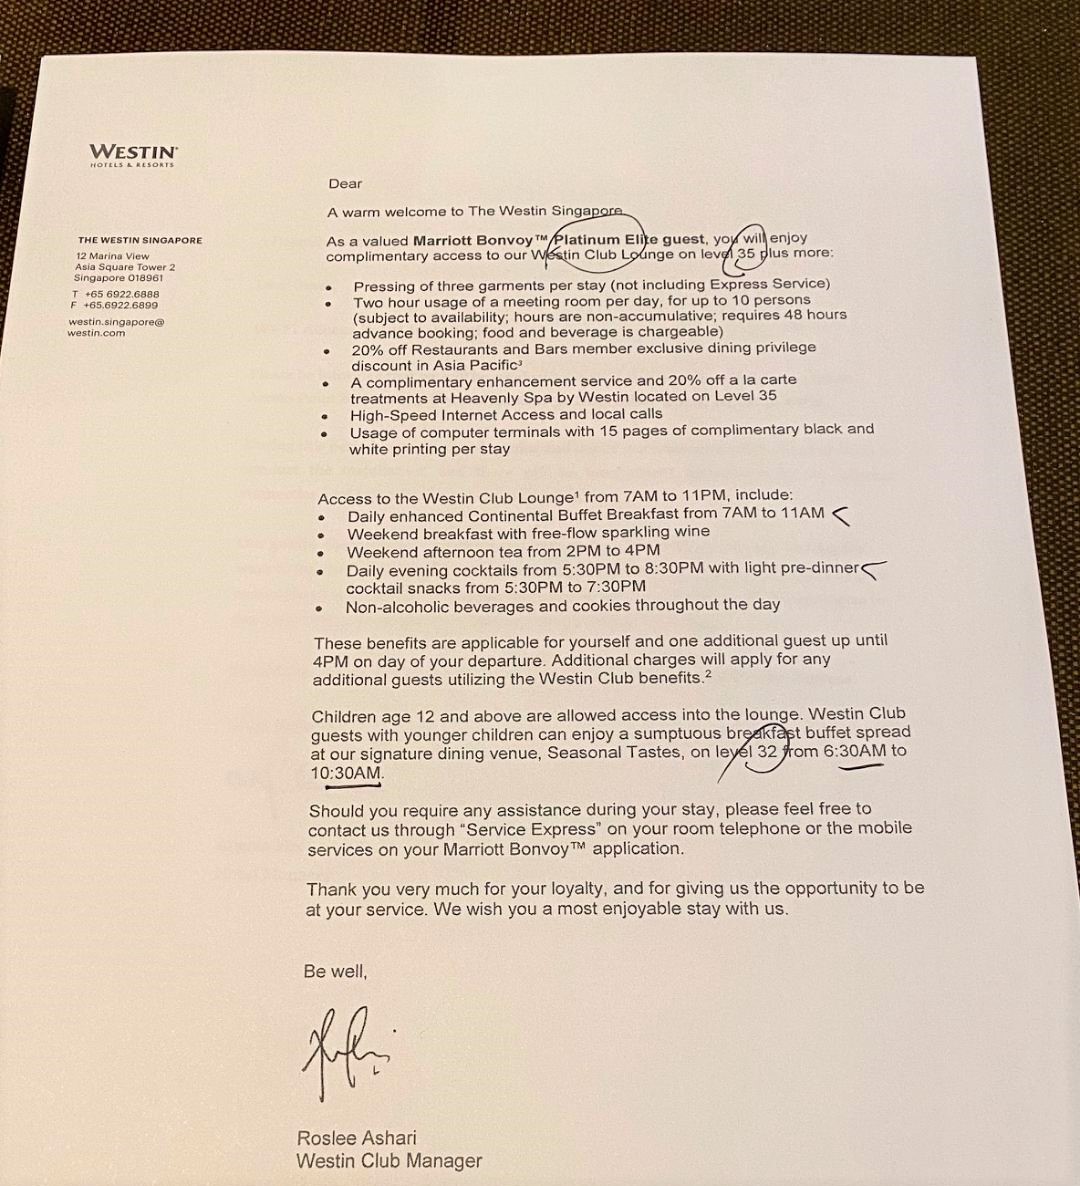 Welcome Letter, The Westin Singapore